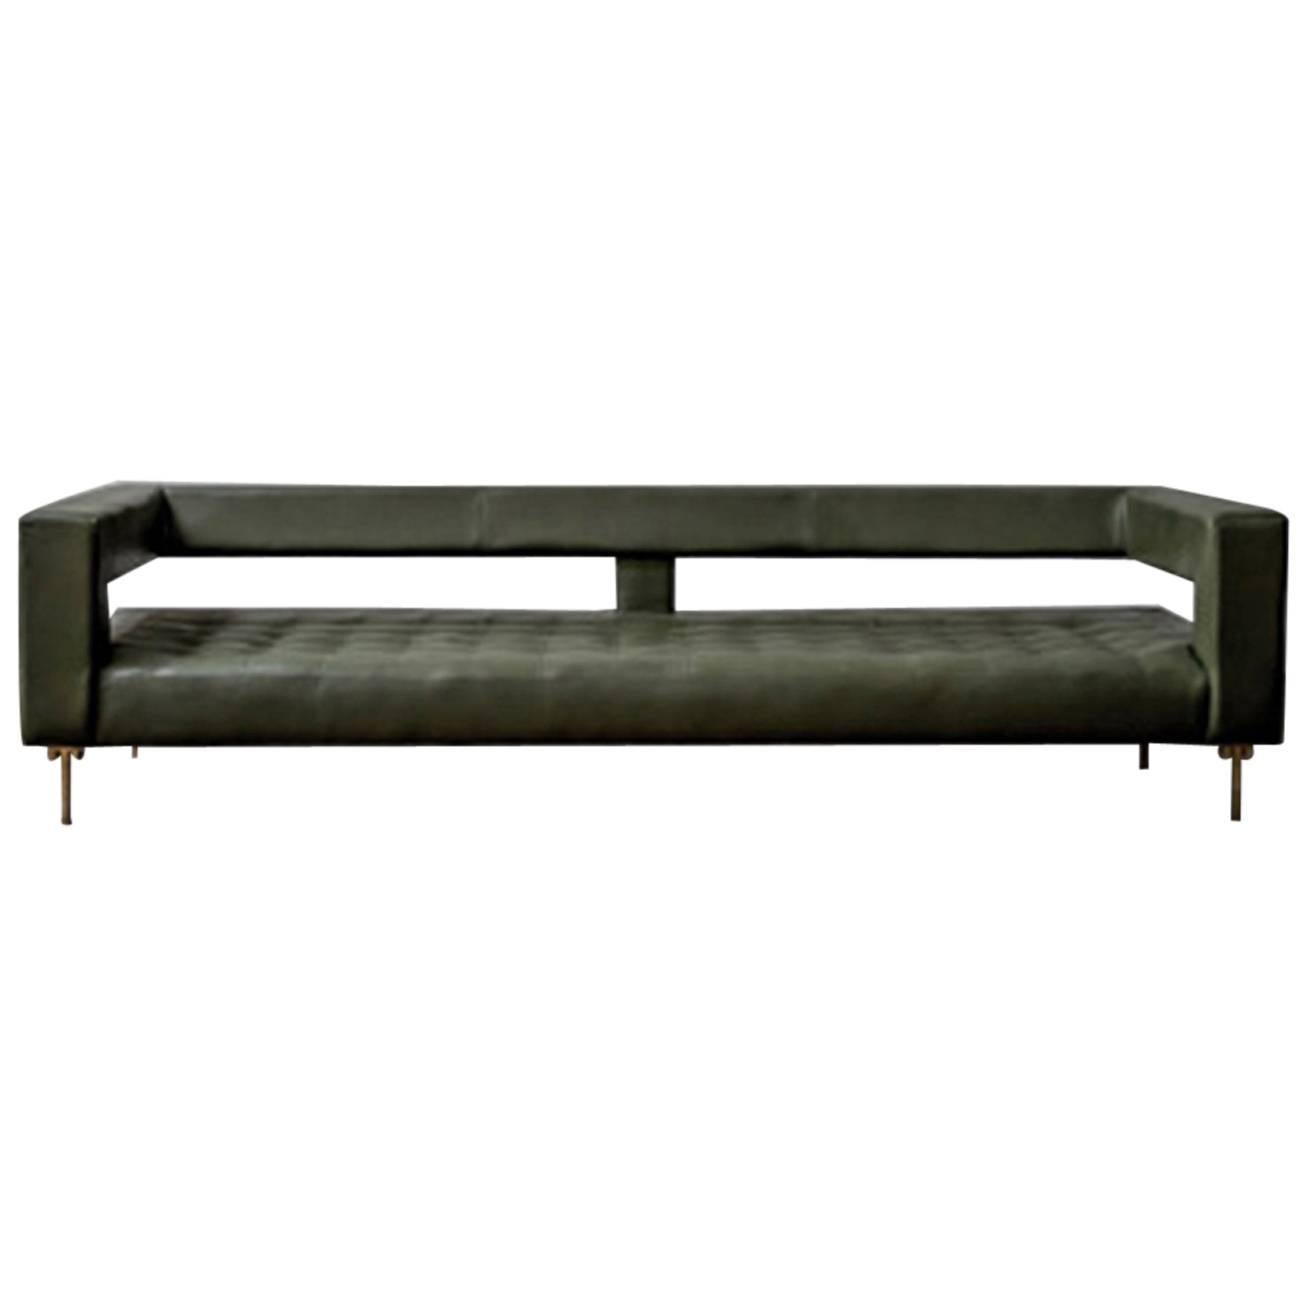 Luteca Air Sofa Hand-Crafted in Mexico with Elmo Leather, COM and COL Options